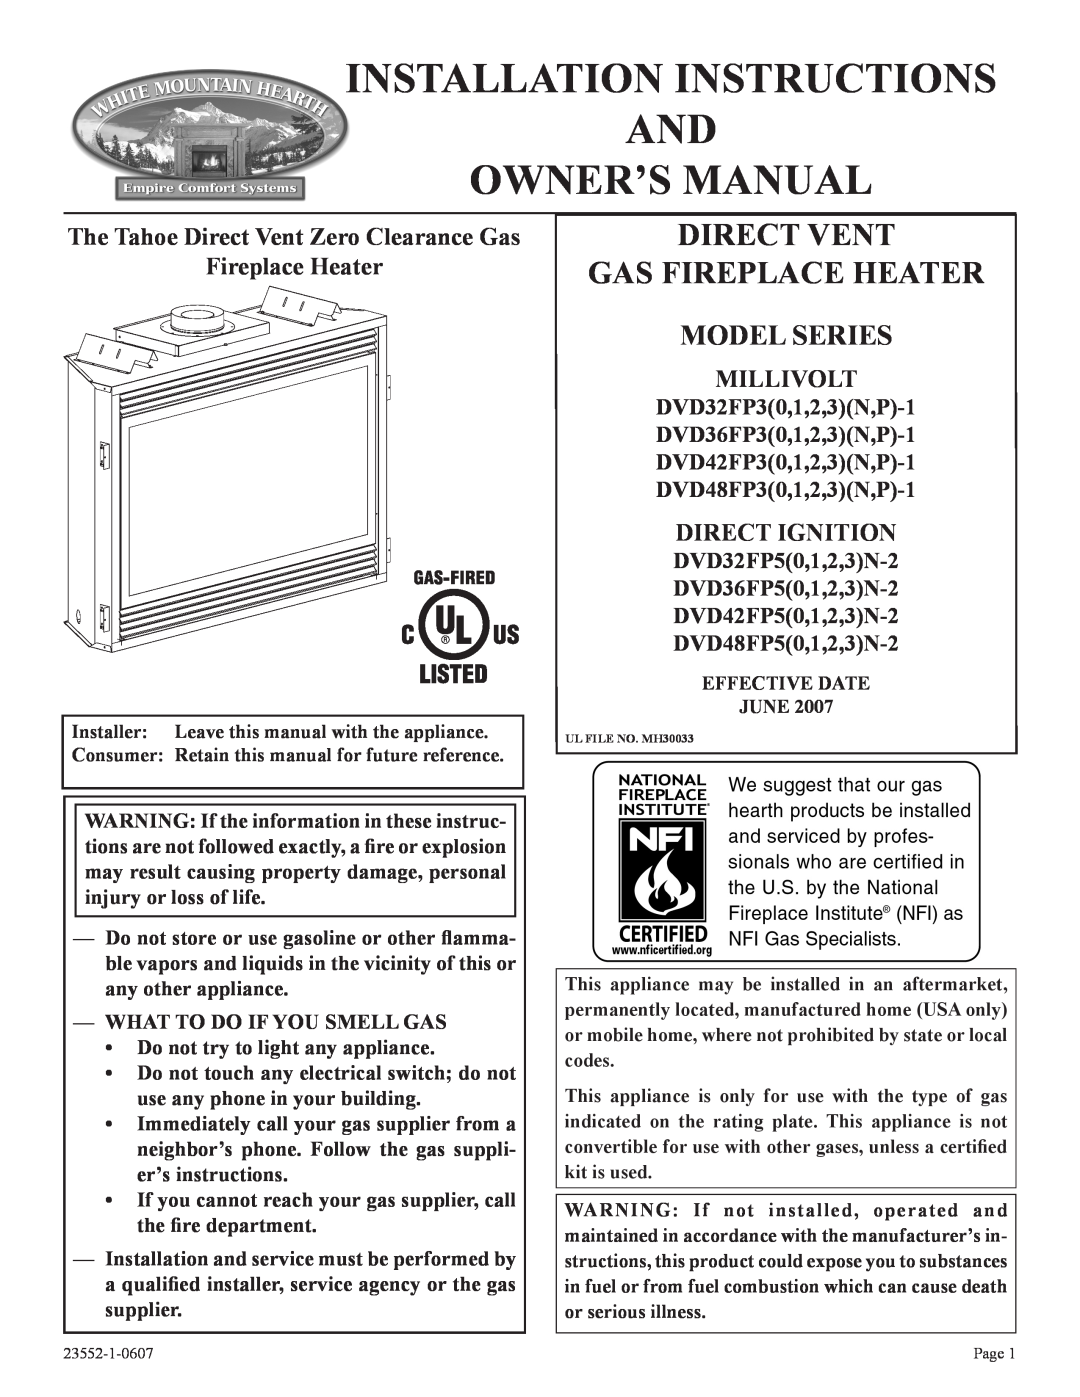 Empire Comfort Systems DVD48FP5 installation instructions The Tahoe Direct Vent Zero Clearance Gas, Fireplace Heater 